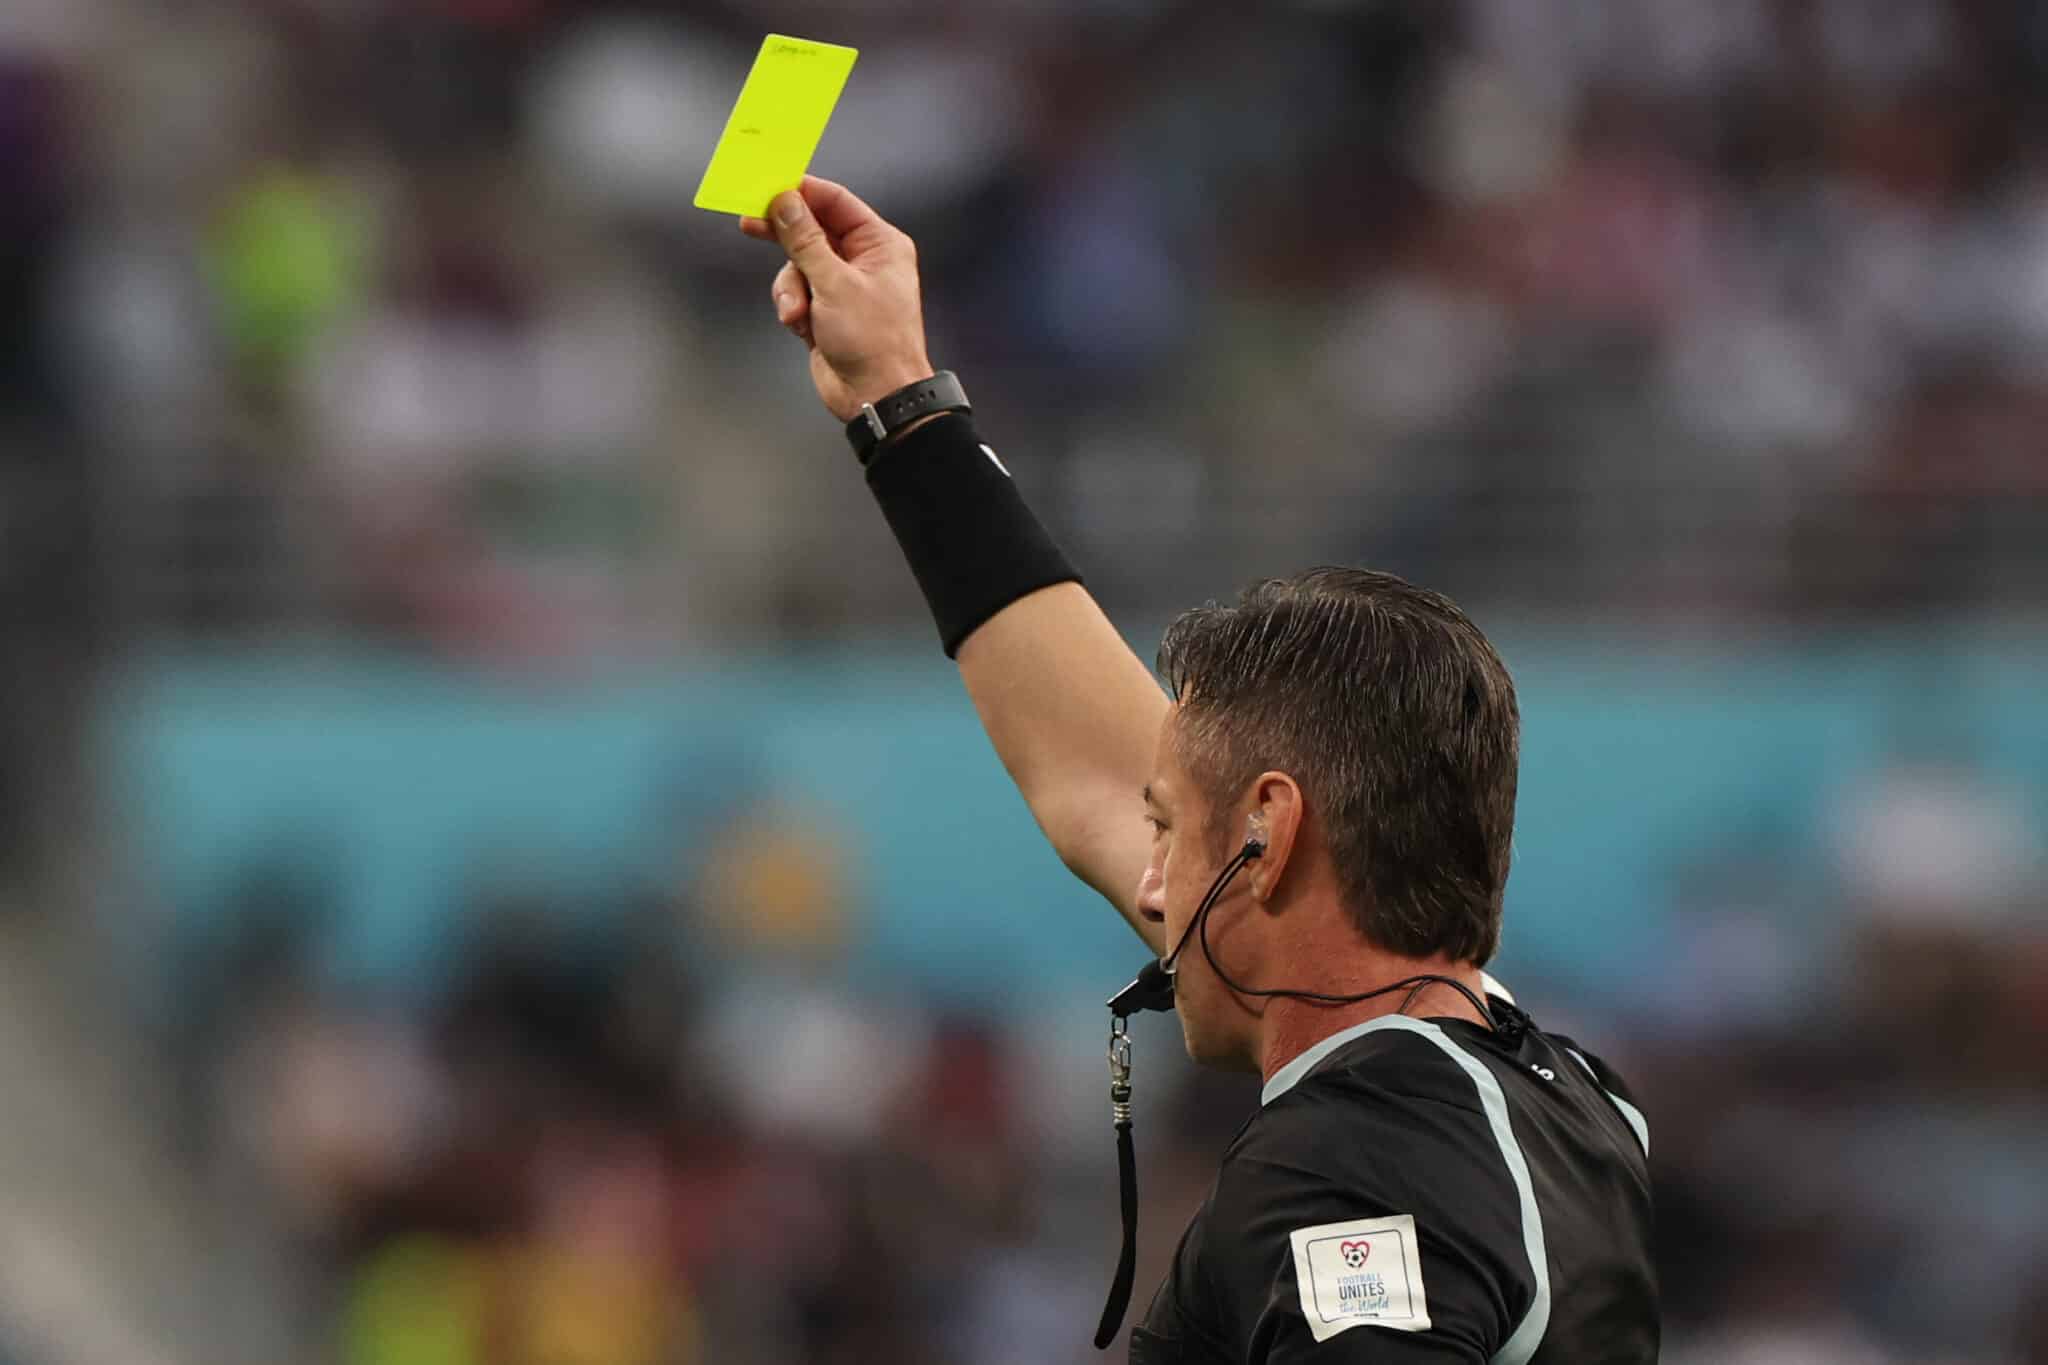 Brazilian referee Raphael Claus issues a yellow card to Iran's midfielder #07 Alireza Jahanbakhsh during the Qatar 2022 World Cup Group B football match between England and Iran at the Khalifa International Stadium in Doha on November 21, 2022. (Photo by Giuseppe CACACE / AFP) (Photo by GIUSEPPE CACACE/AFP via Getty Images)